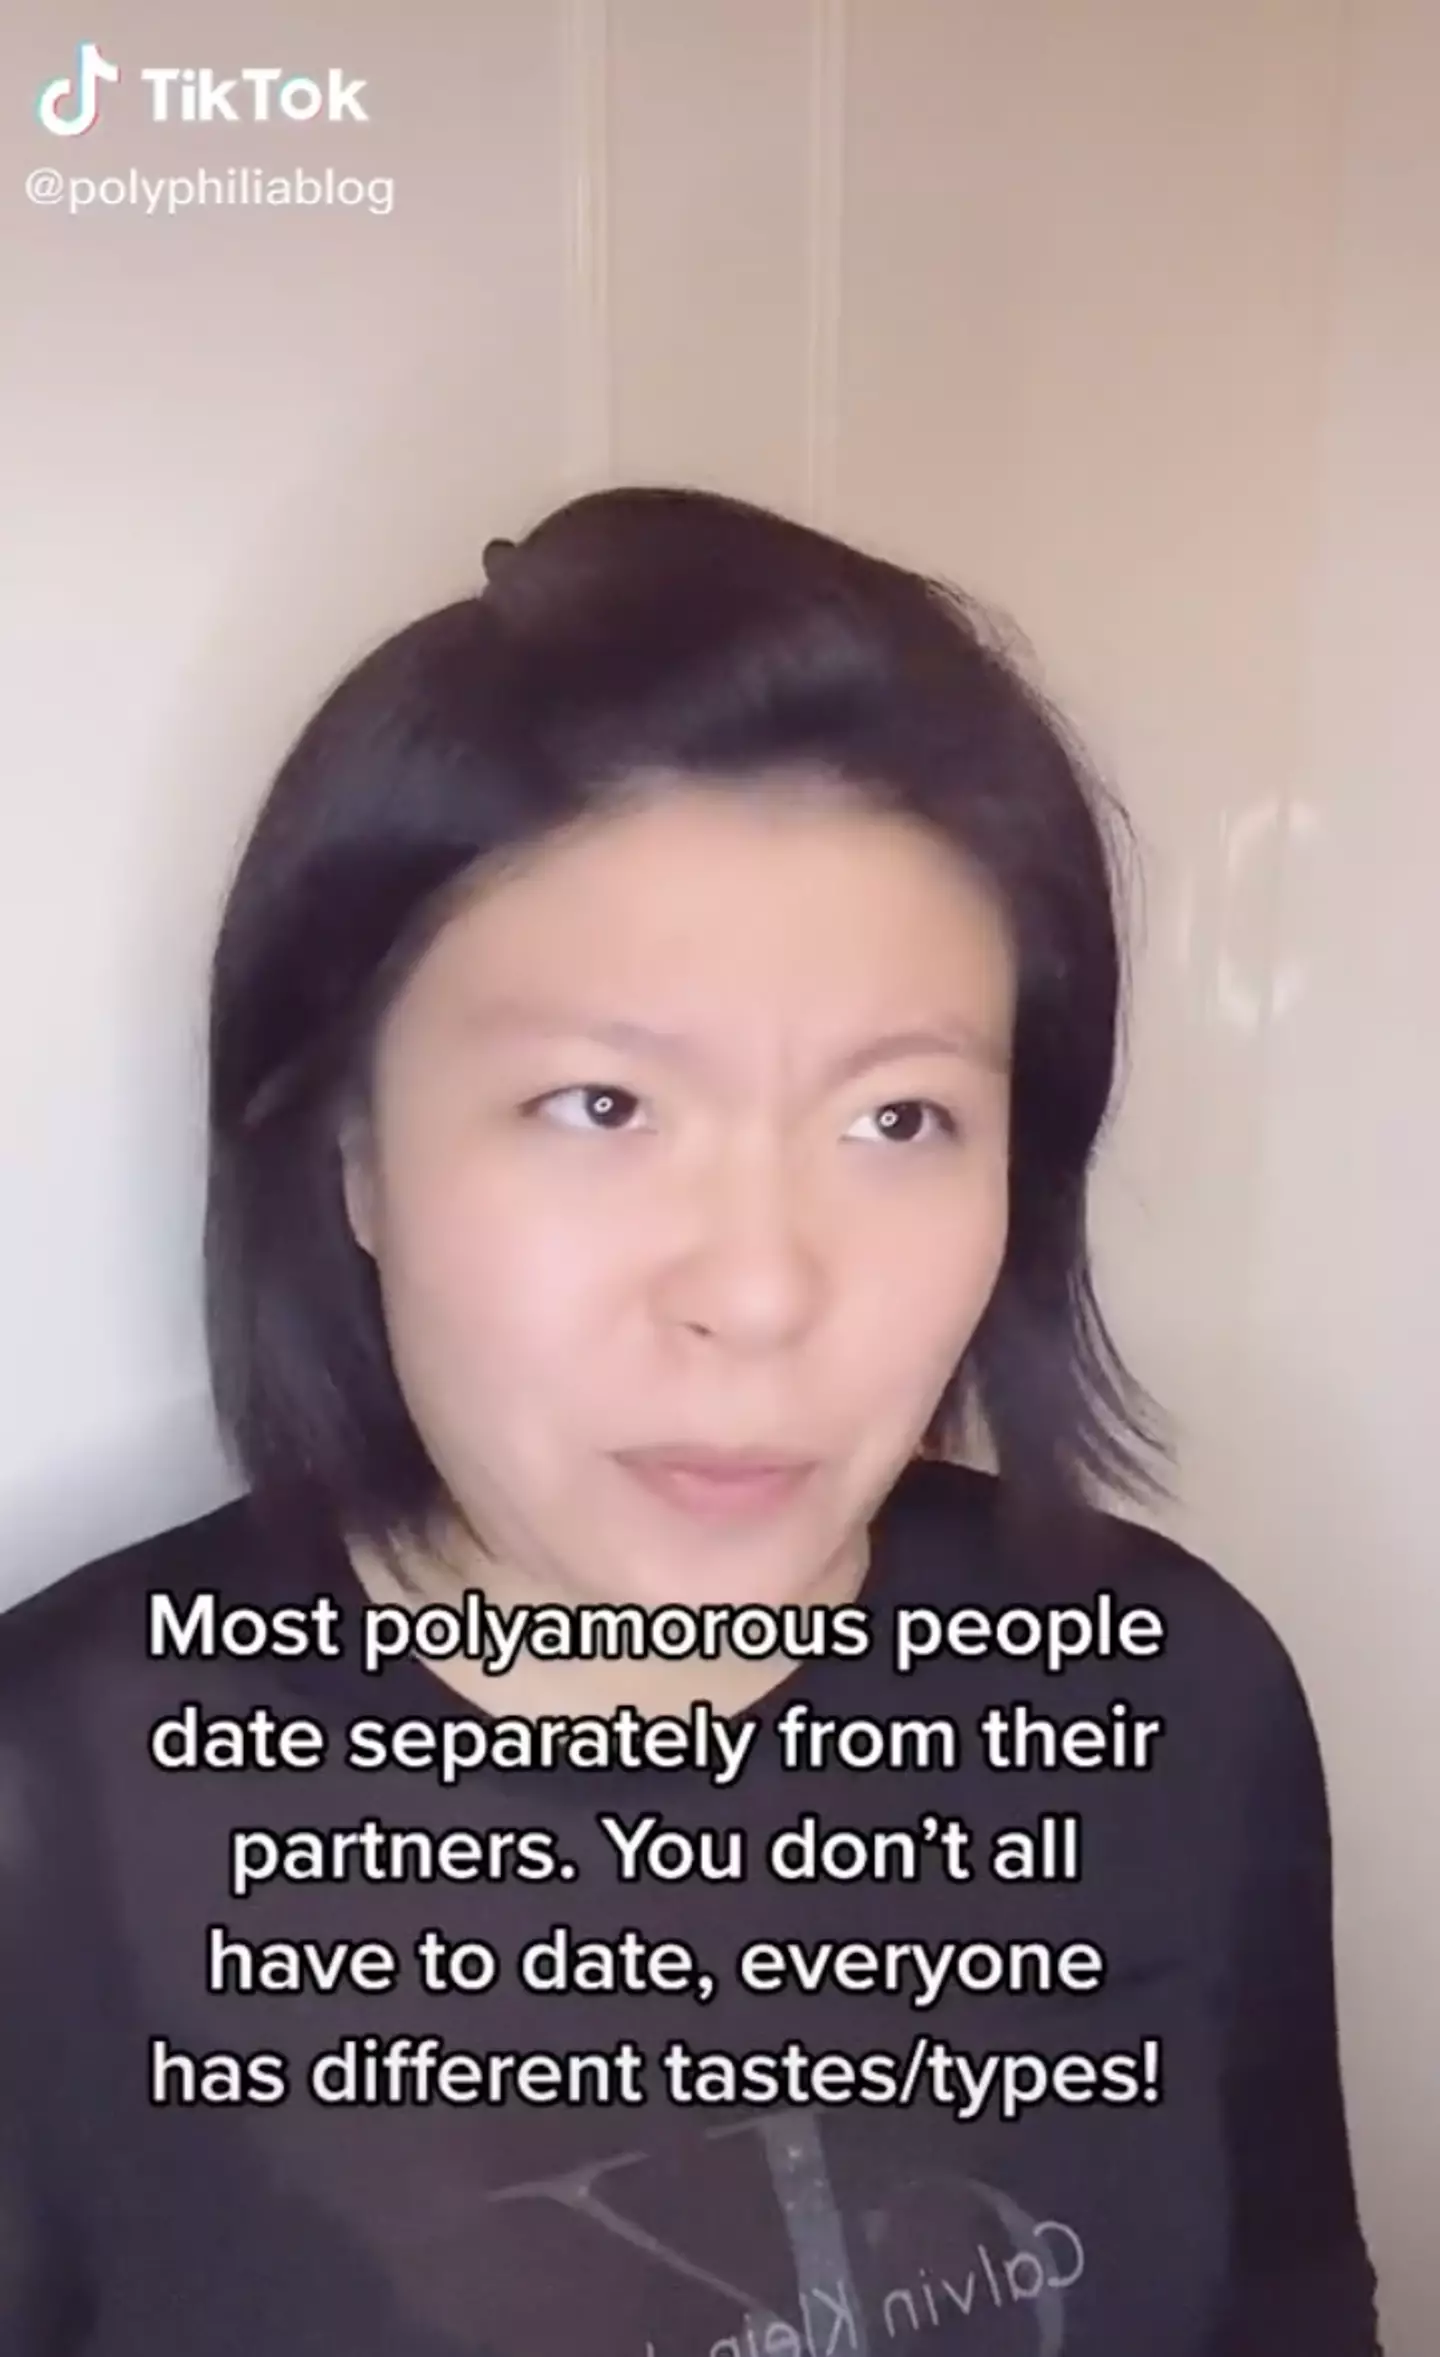 The TikTok star revealed that polyamorous people can cheat - it depends on each dynamic.